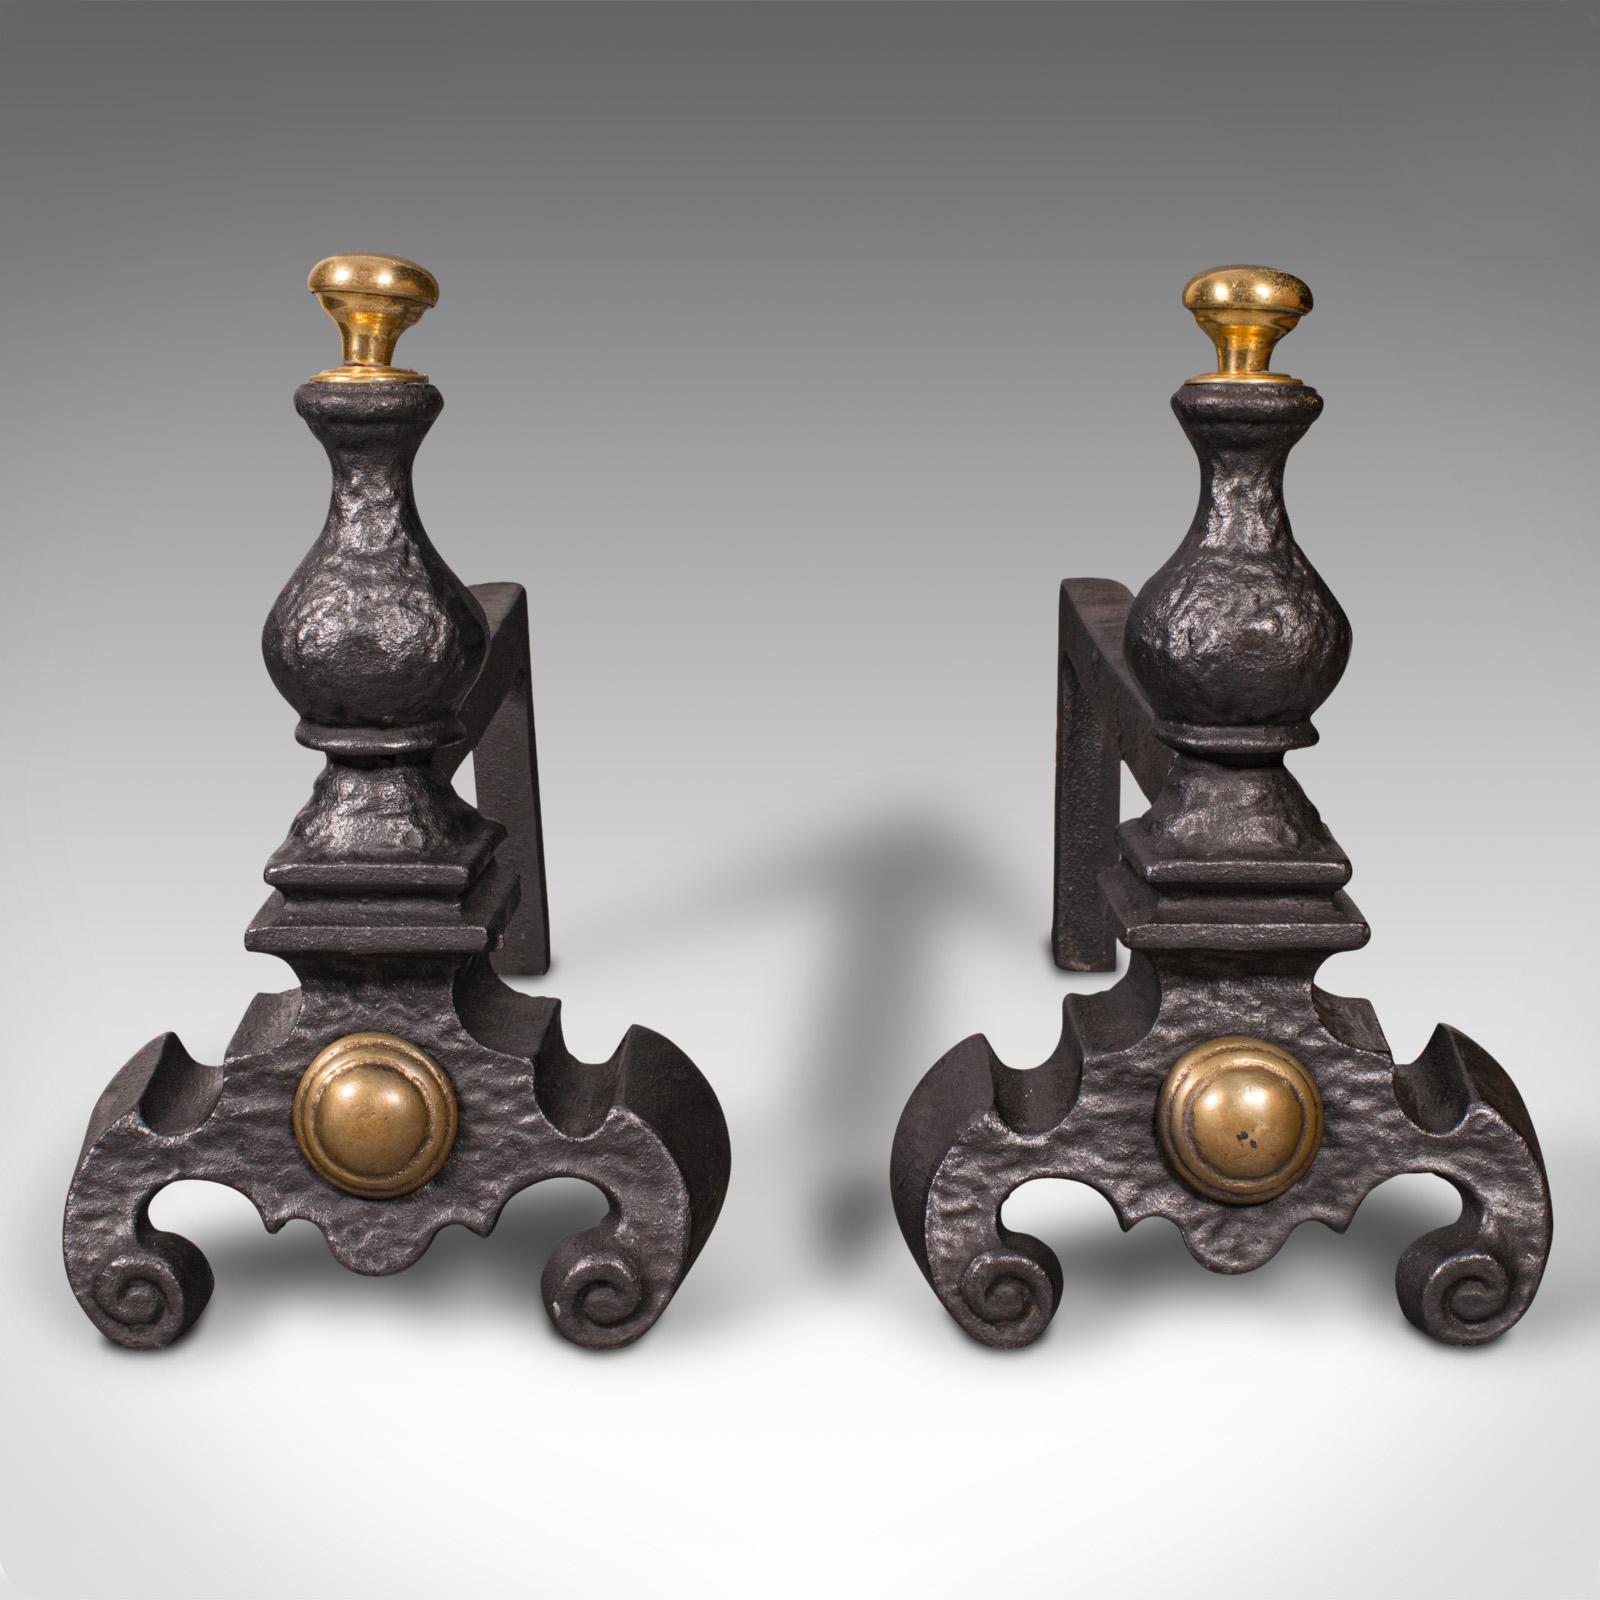 This is a pair of antique decorative fire rests. An English, cast iron fireside andiron, dating to the mid Victorian period, circa 1850.

Eye-catching fireside tool rests with polished mounts
Displaying a desirable aged patina and in good